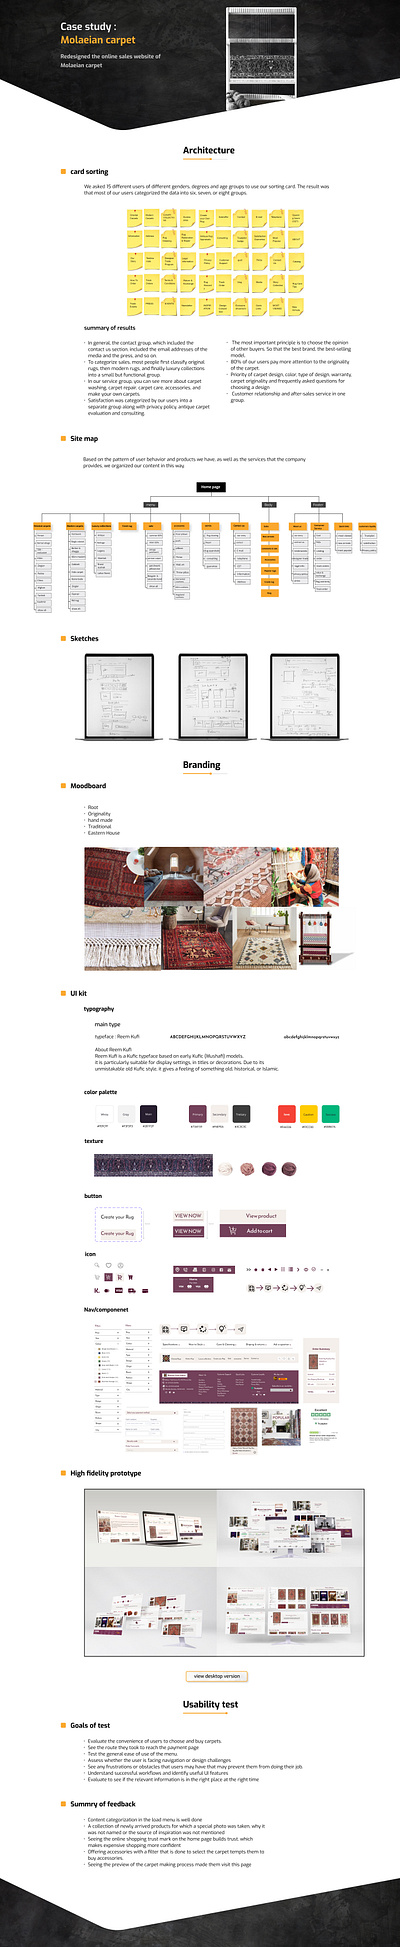 Molaeian carpet - part 2 branding card sorting design graphic design logo moodboard navcomponenet site map sketches typography ui ui kit usability test ux vector